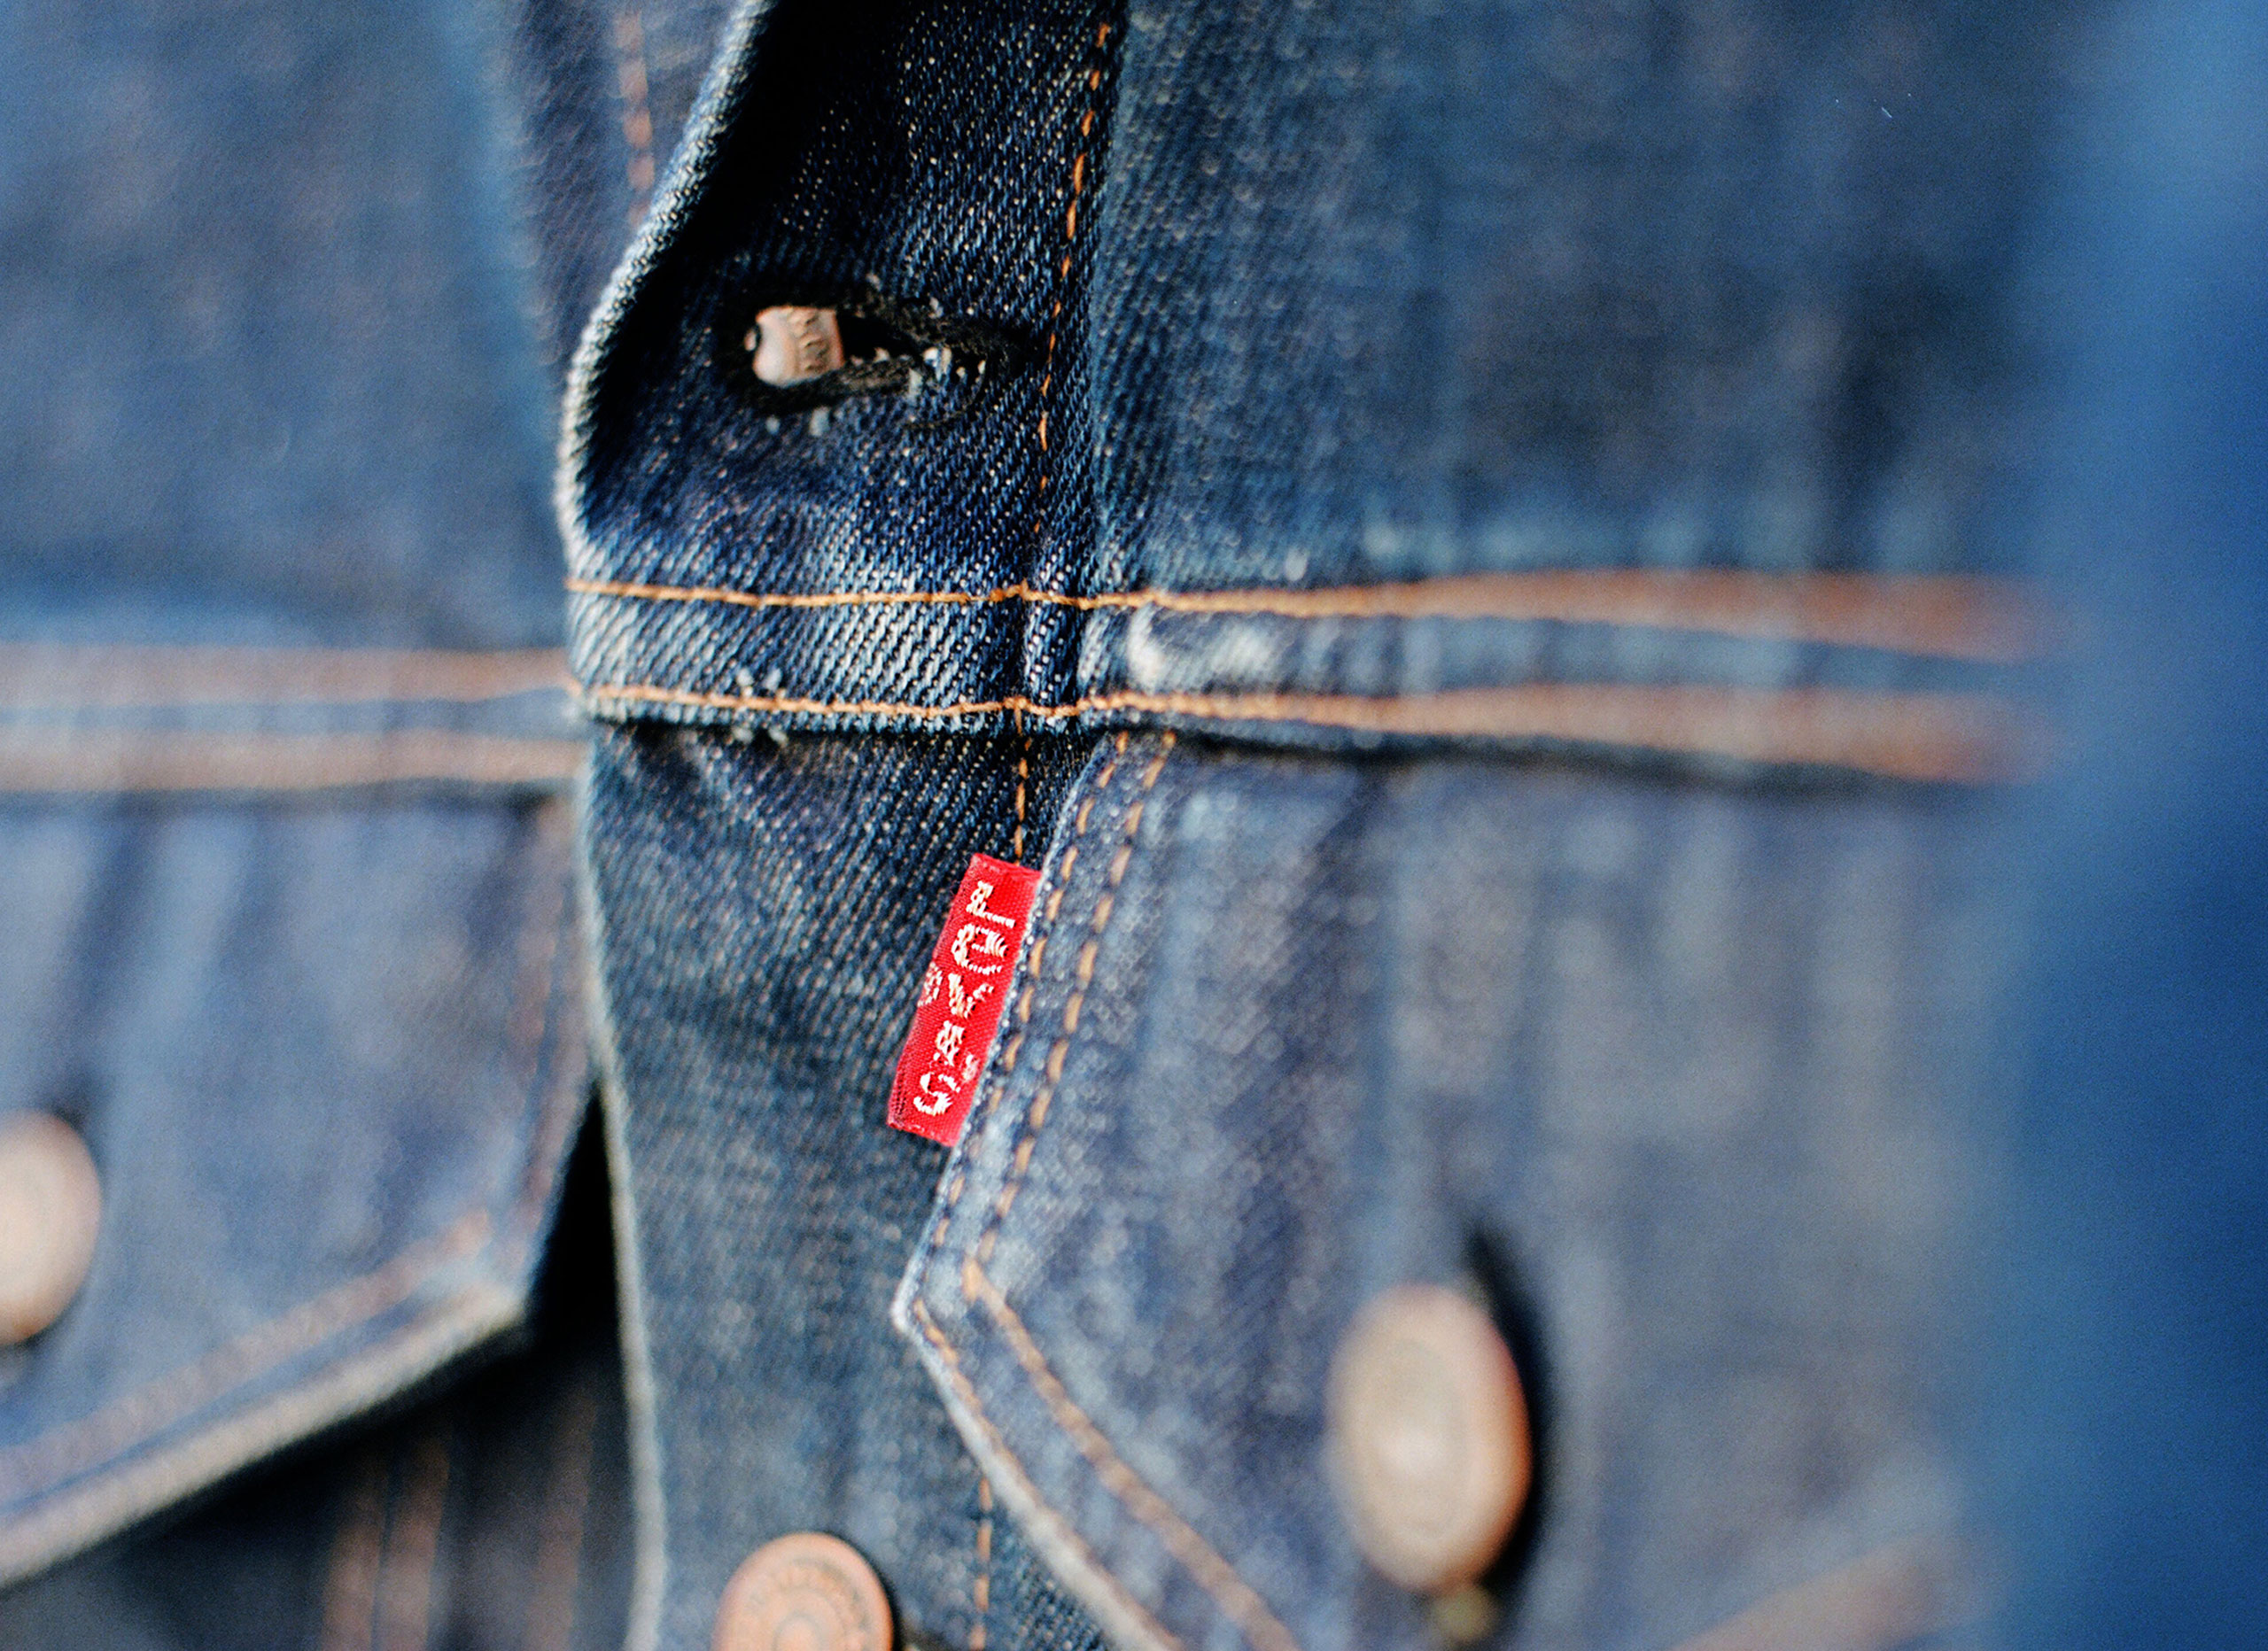 Product Quality and Safety - Levi Strauss & Co : Levi Strauss & Co